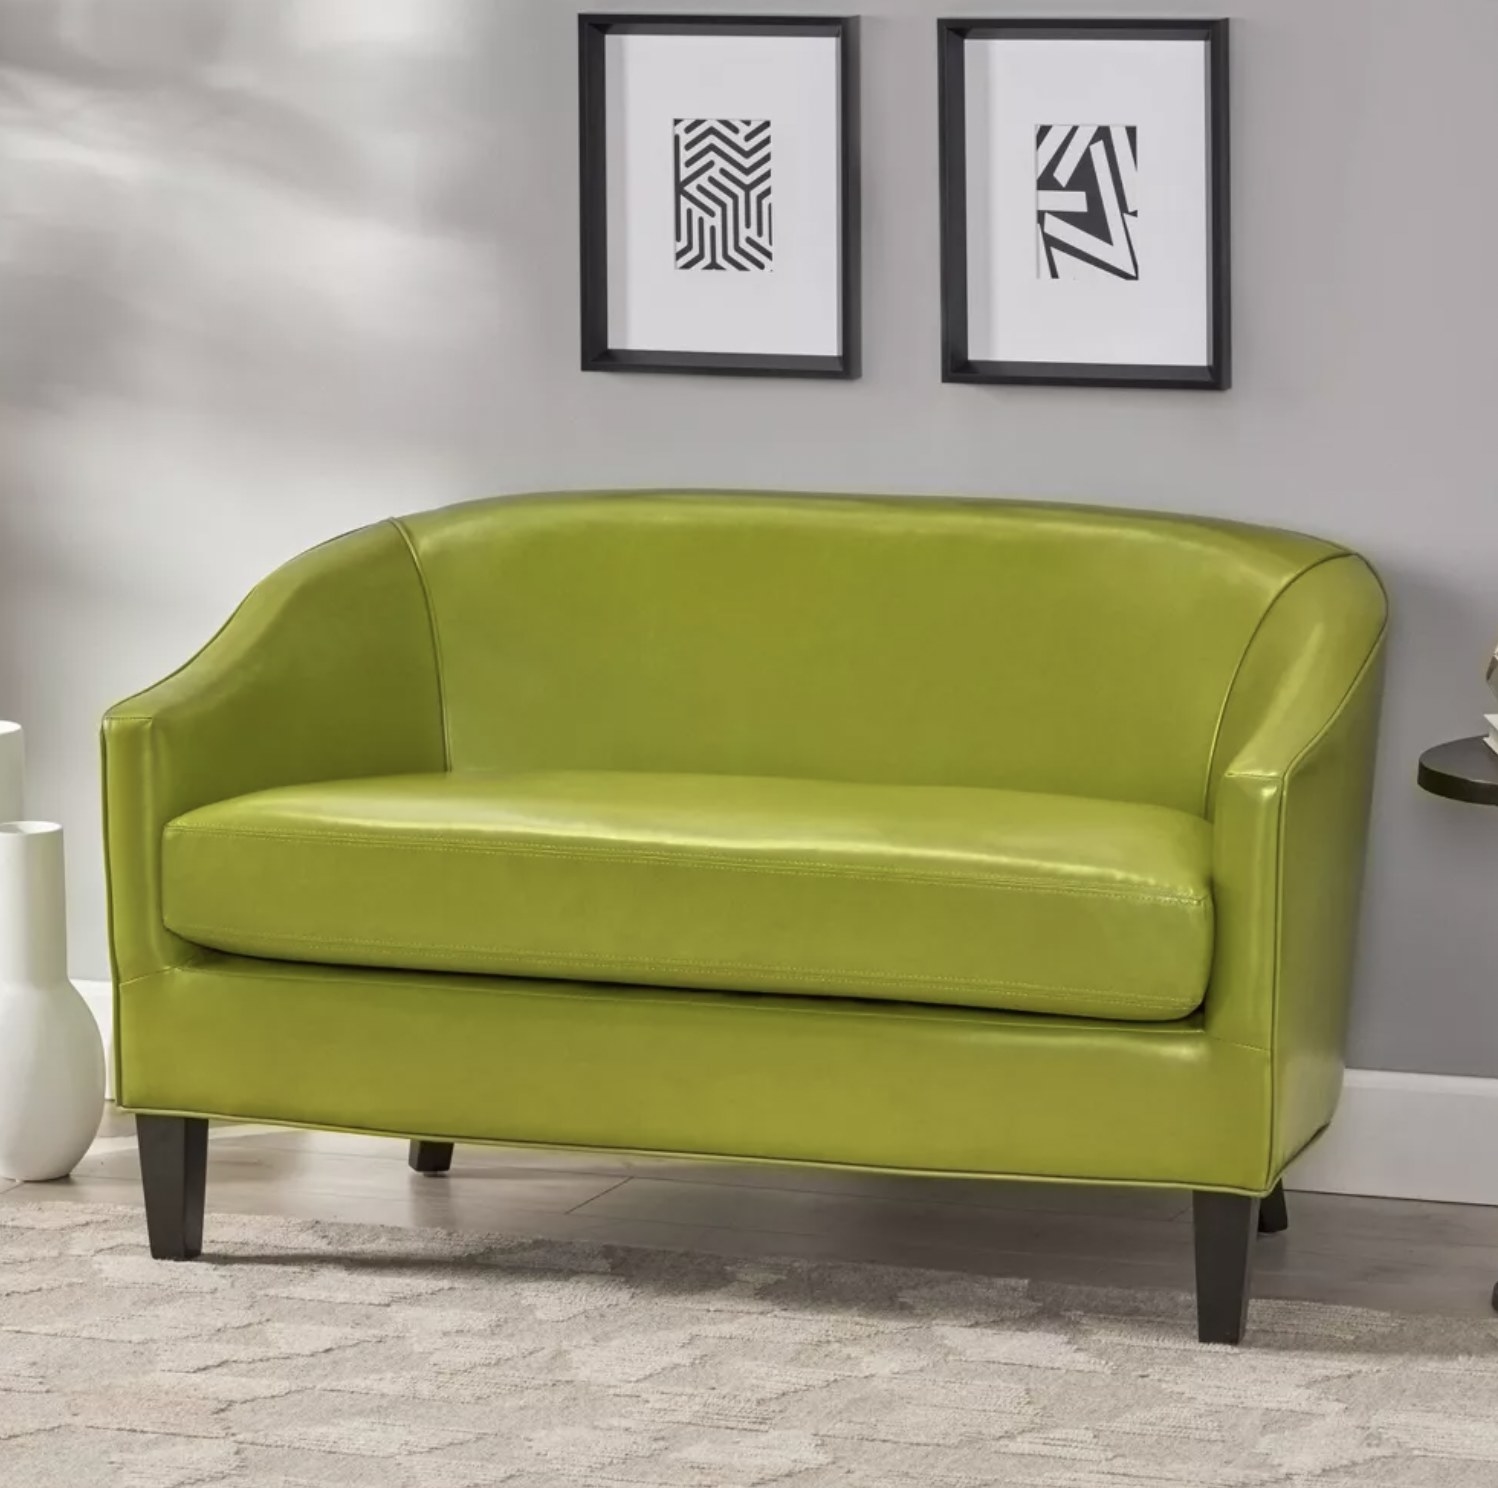 The green faux leather loveseat